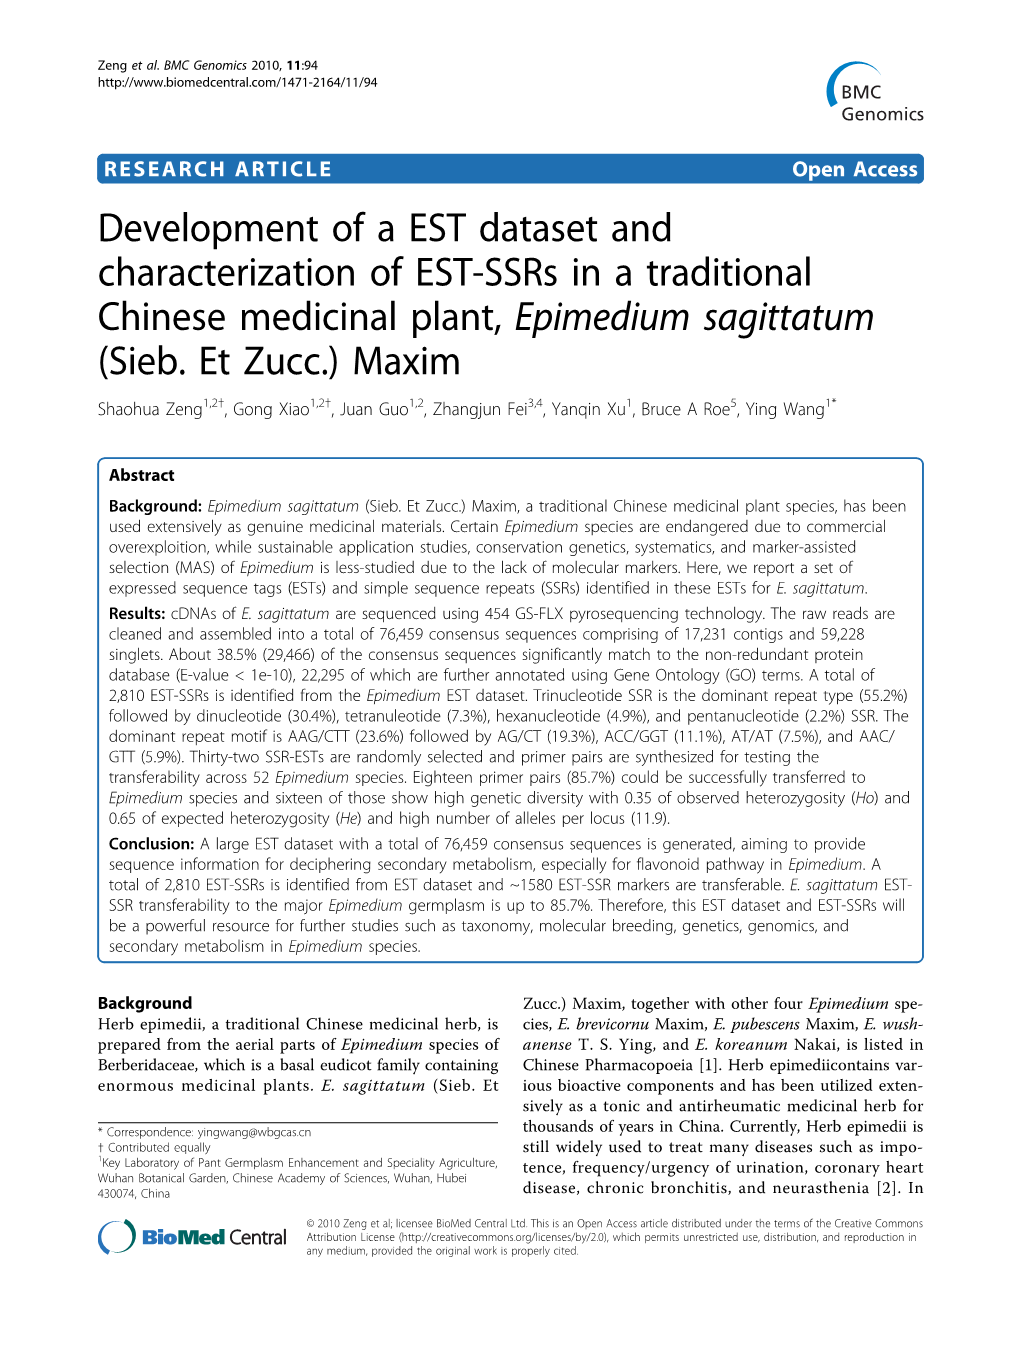 Development of a EST Dataset and Characterization of EST-Ssrs in a Traditional Chinese Medicinal Plant, Epimedium Sagittatum (Sieb